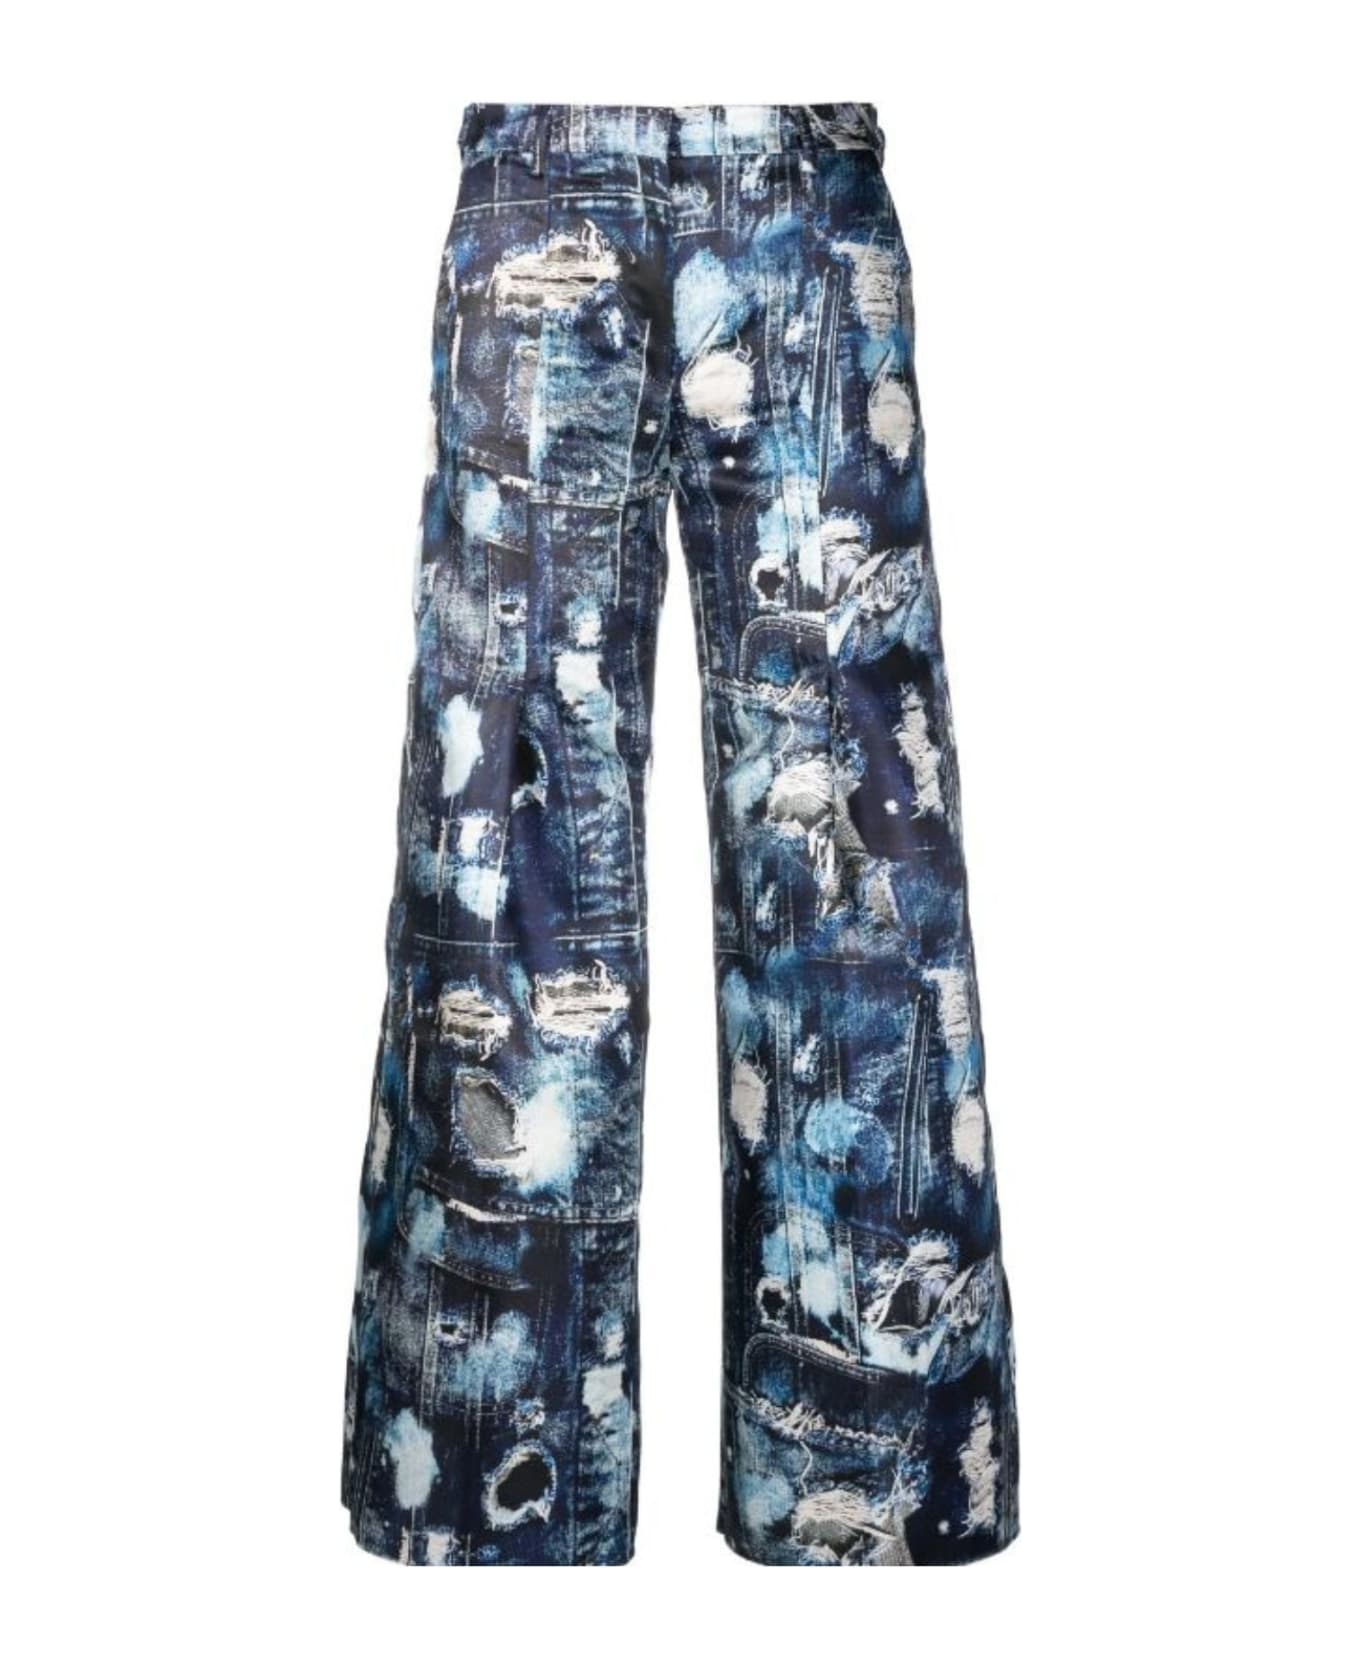 John Richmond Cropped Trousers With Wide Leg And Iconic Runway Denim-effect Pattern. - Fantasia ボトムス